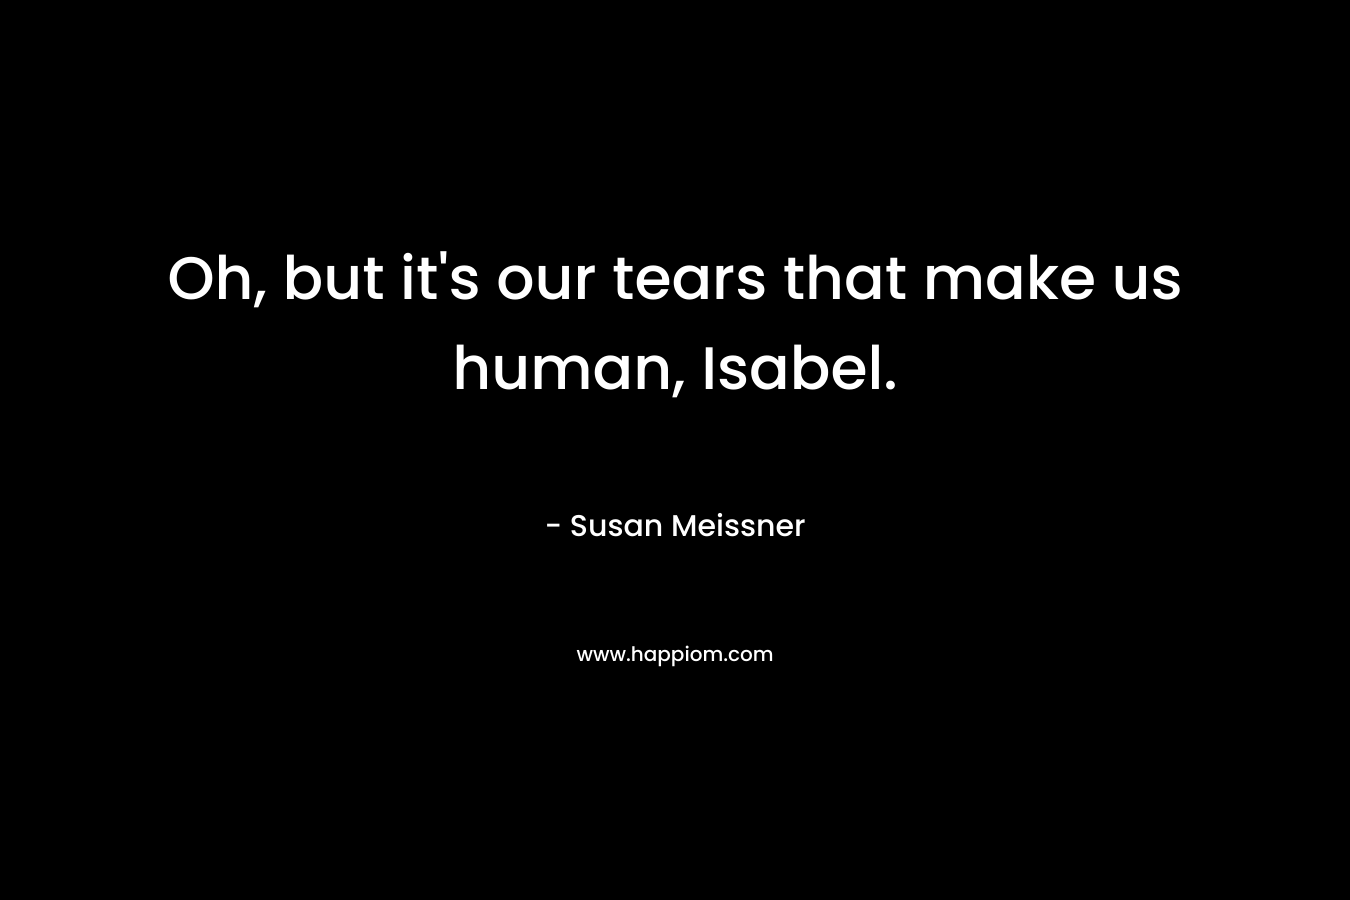 Oh, but it’s our tears that make us human, Isabel. – Susan Meissner